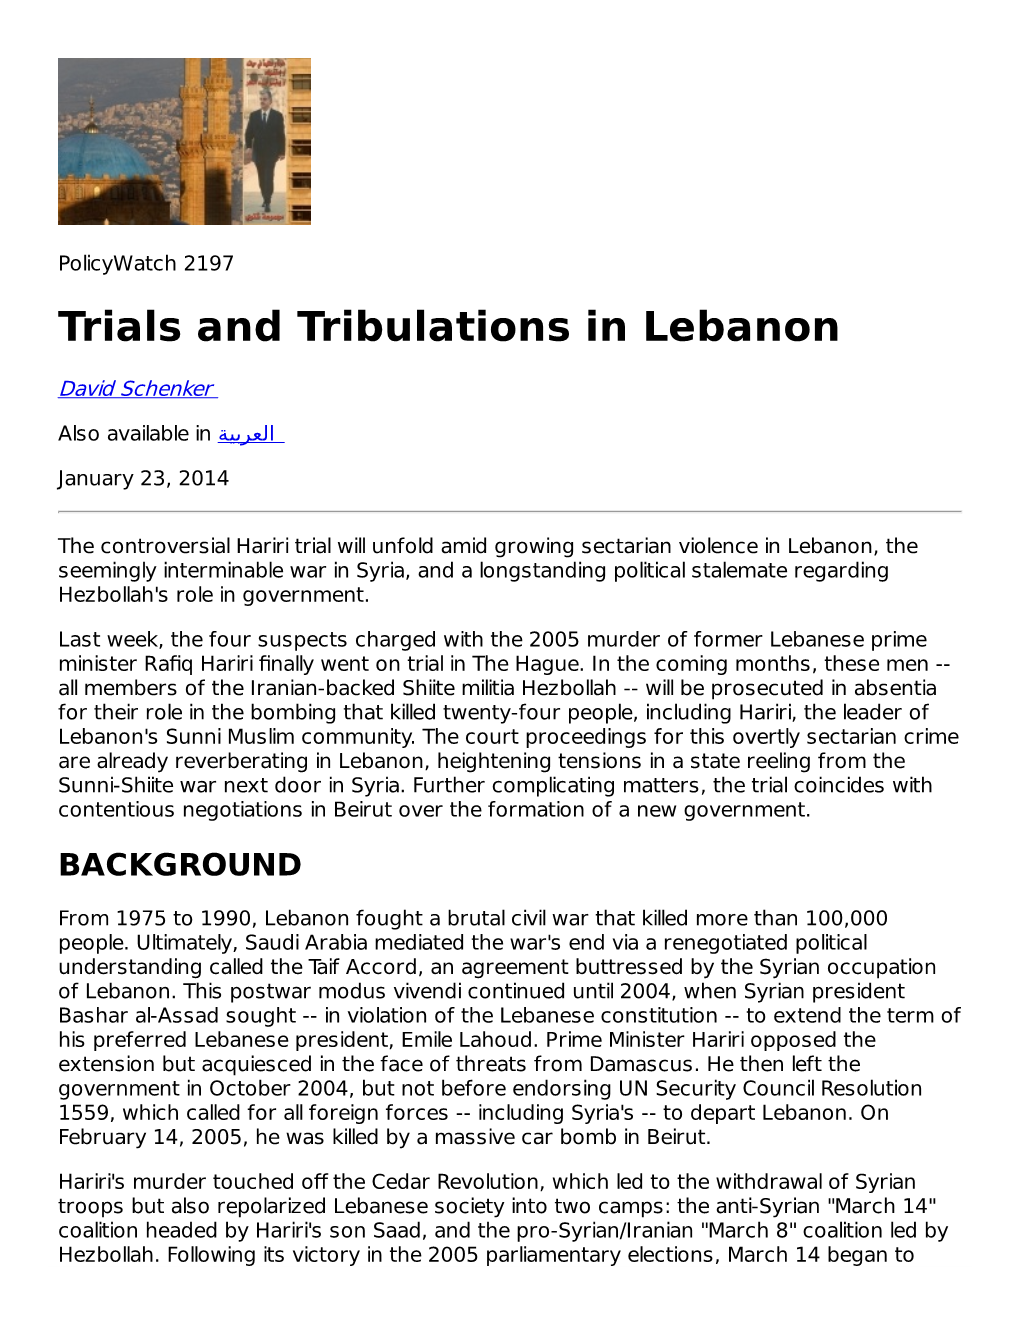 Trials and Tribulations in Lebanon